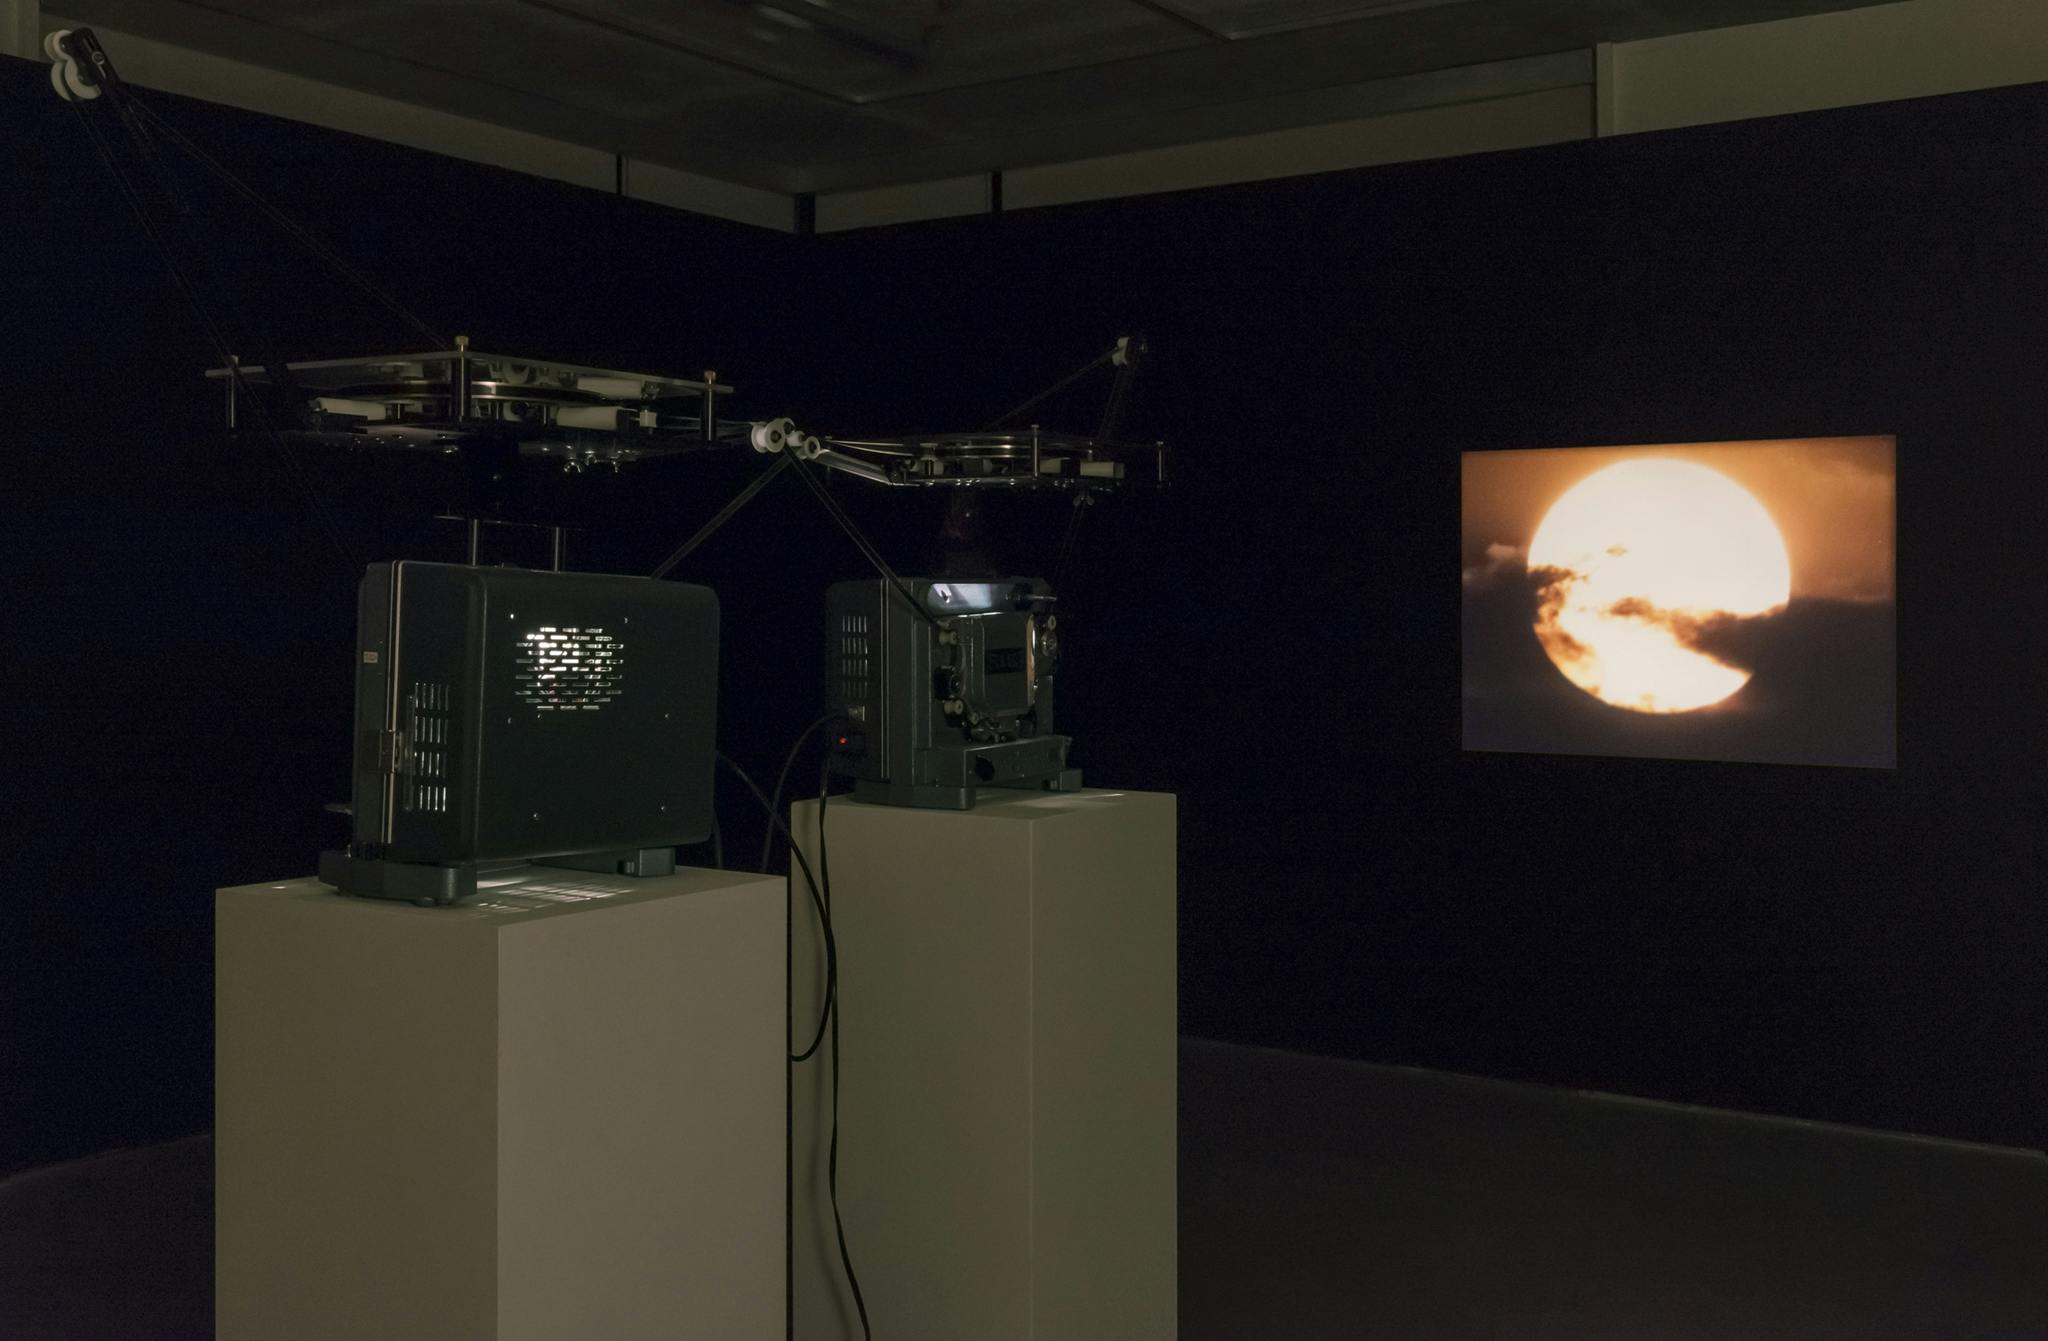 A dark gallery space with painted black walls and two projectors installed on white plinths. The projectors thread a single film between them, projecting a video of the sun. 